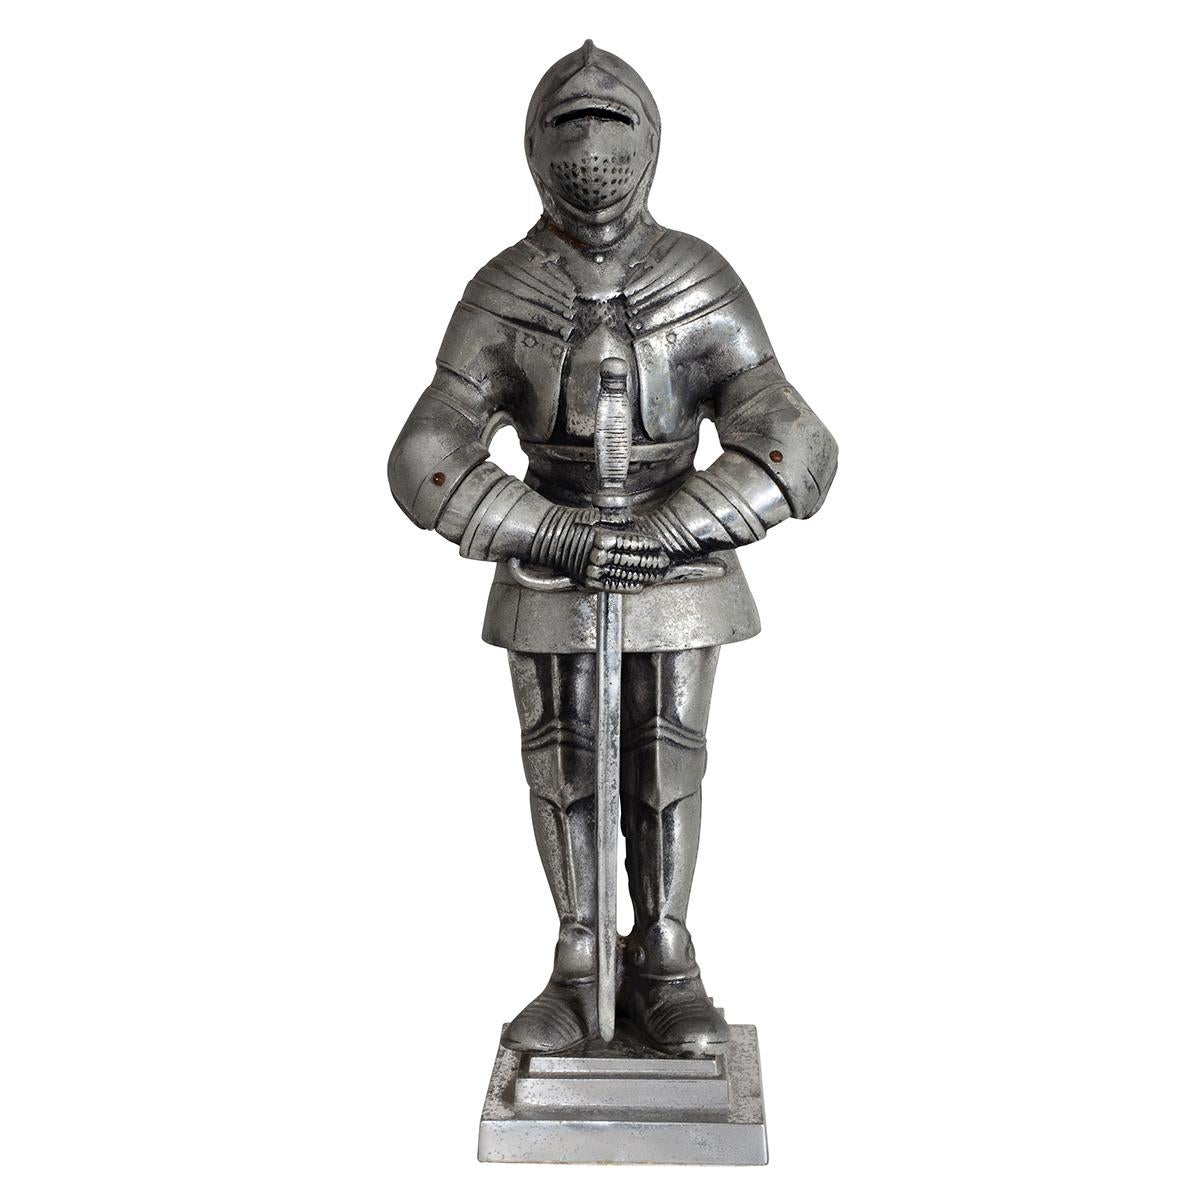 Very cool, funky knight in (not-so) shining armor.

Would make a great lamp!

Dimensions: 11′ W x 25” H